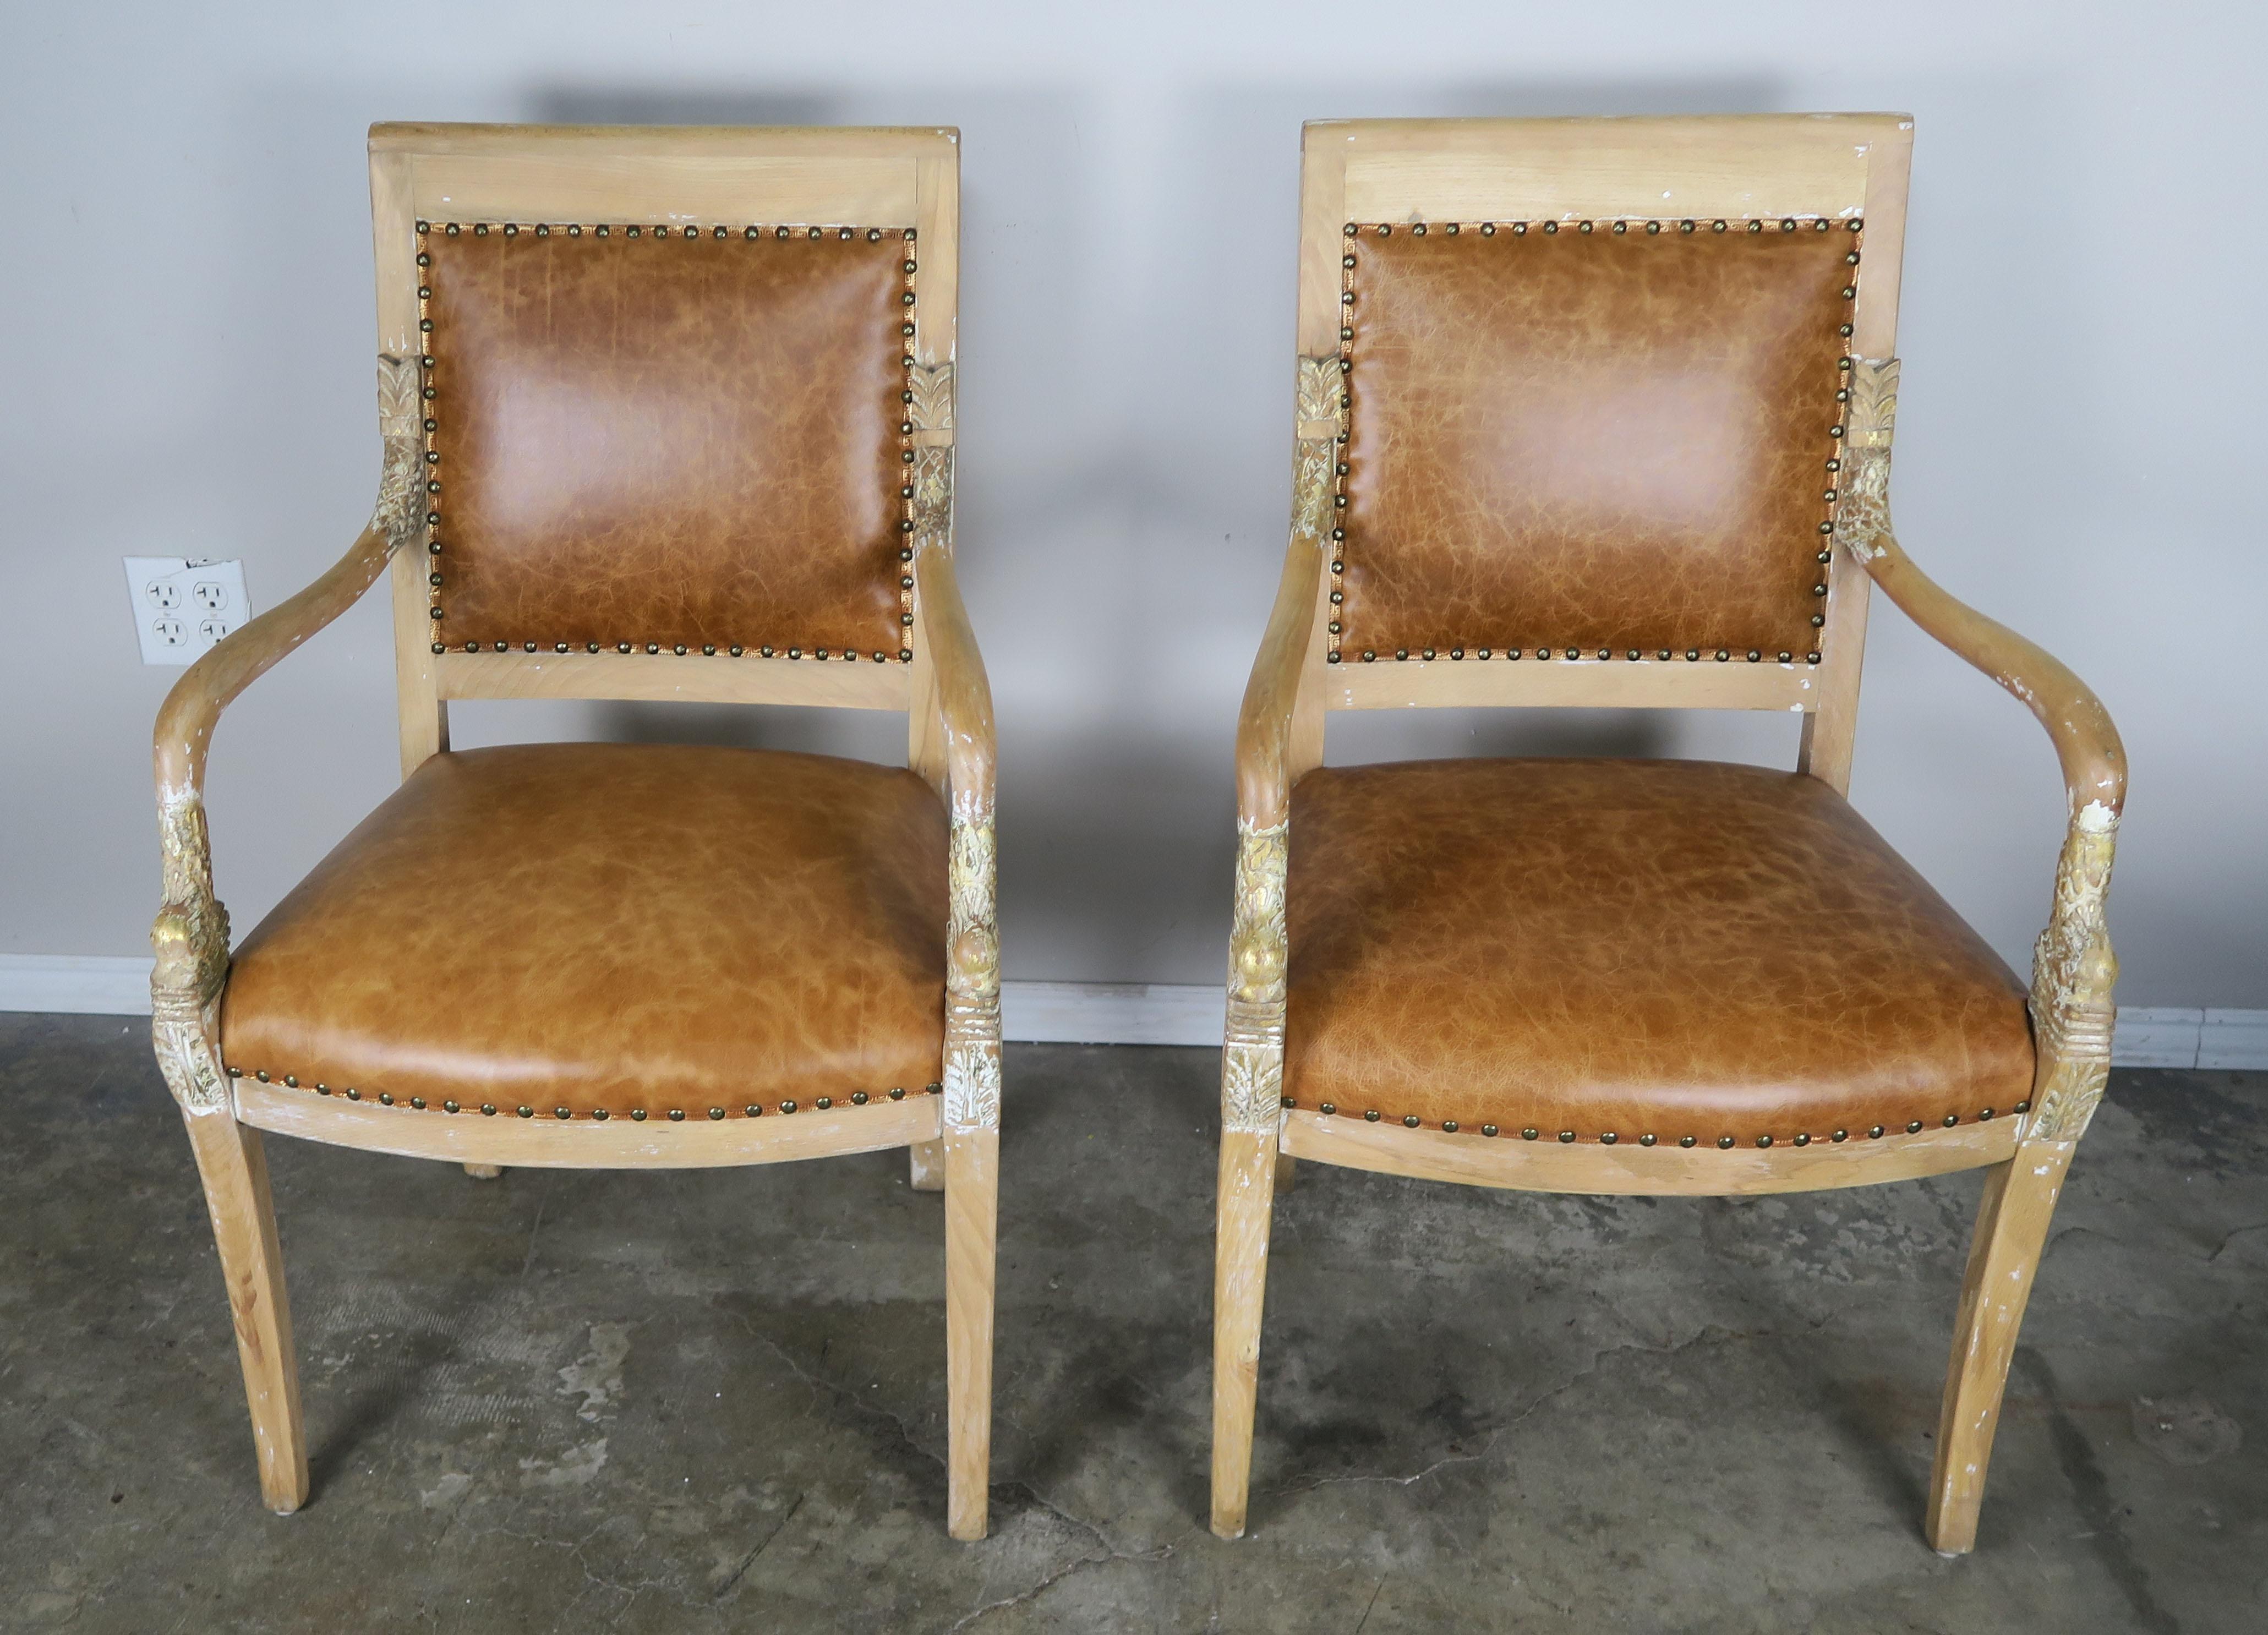 Pair of Italian painted and parcel gilt carved wood armchairs with dolphin motif arms. Leather upholstered with leather gold embossed Greek key gimp with spaced nailhead trim detail. Only remnants of paint and gold leaf throughout.
Measures: Seat